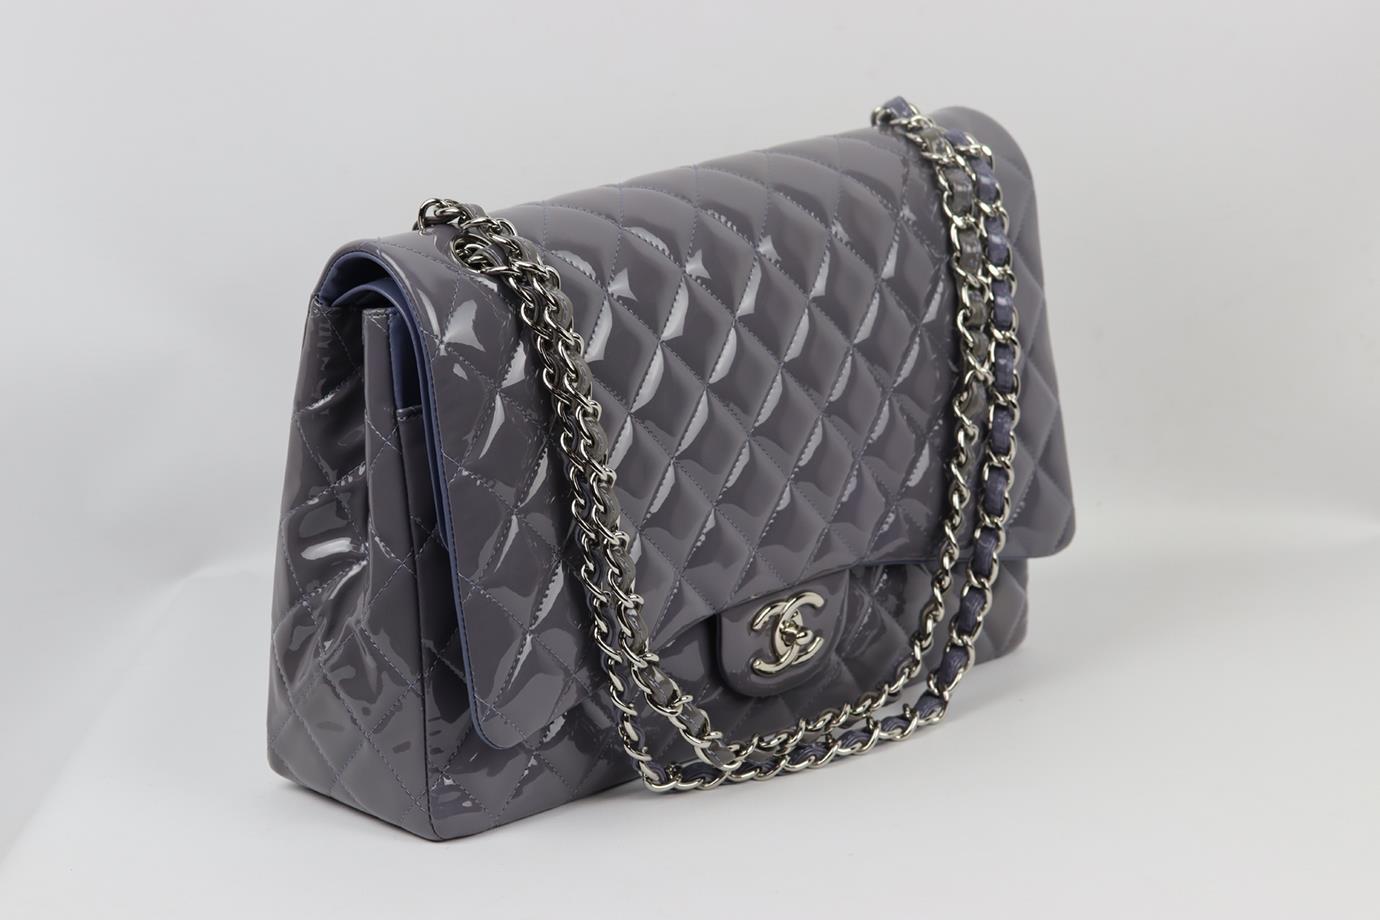 Chanel 2012 Maxi Classic Quilted Patent Leather Double Flap Shoulder Bag For Sale 3